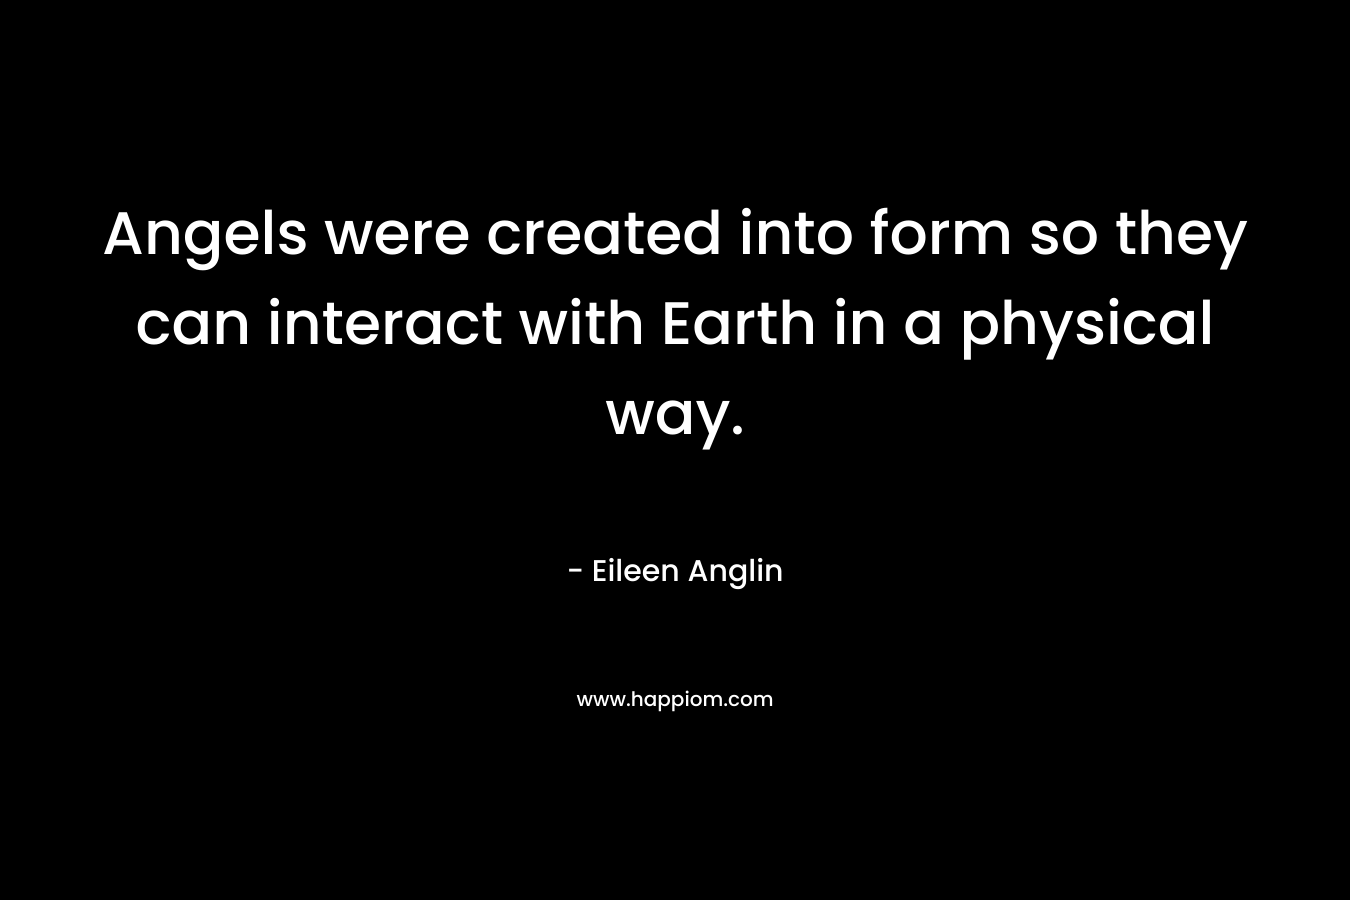 Angels were created into form so they can interact with Earth in a physical way. – Eileen Anglin